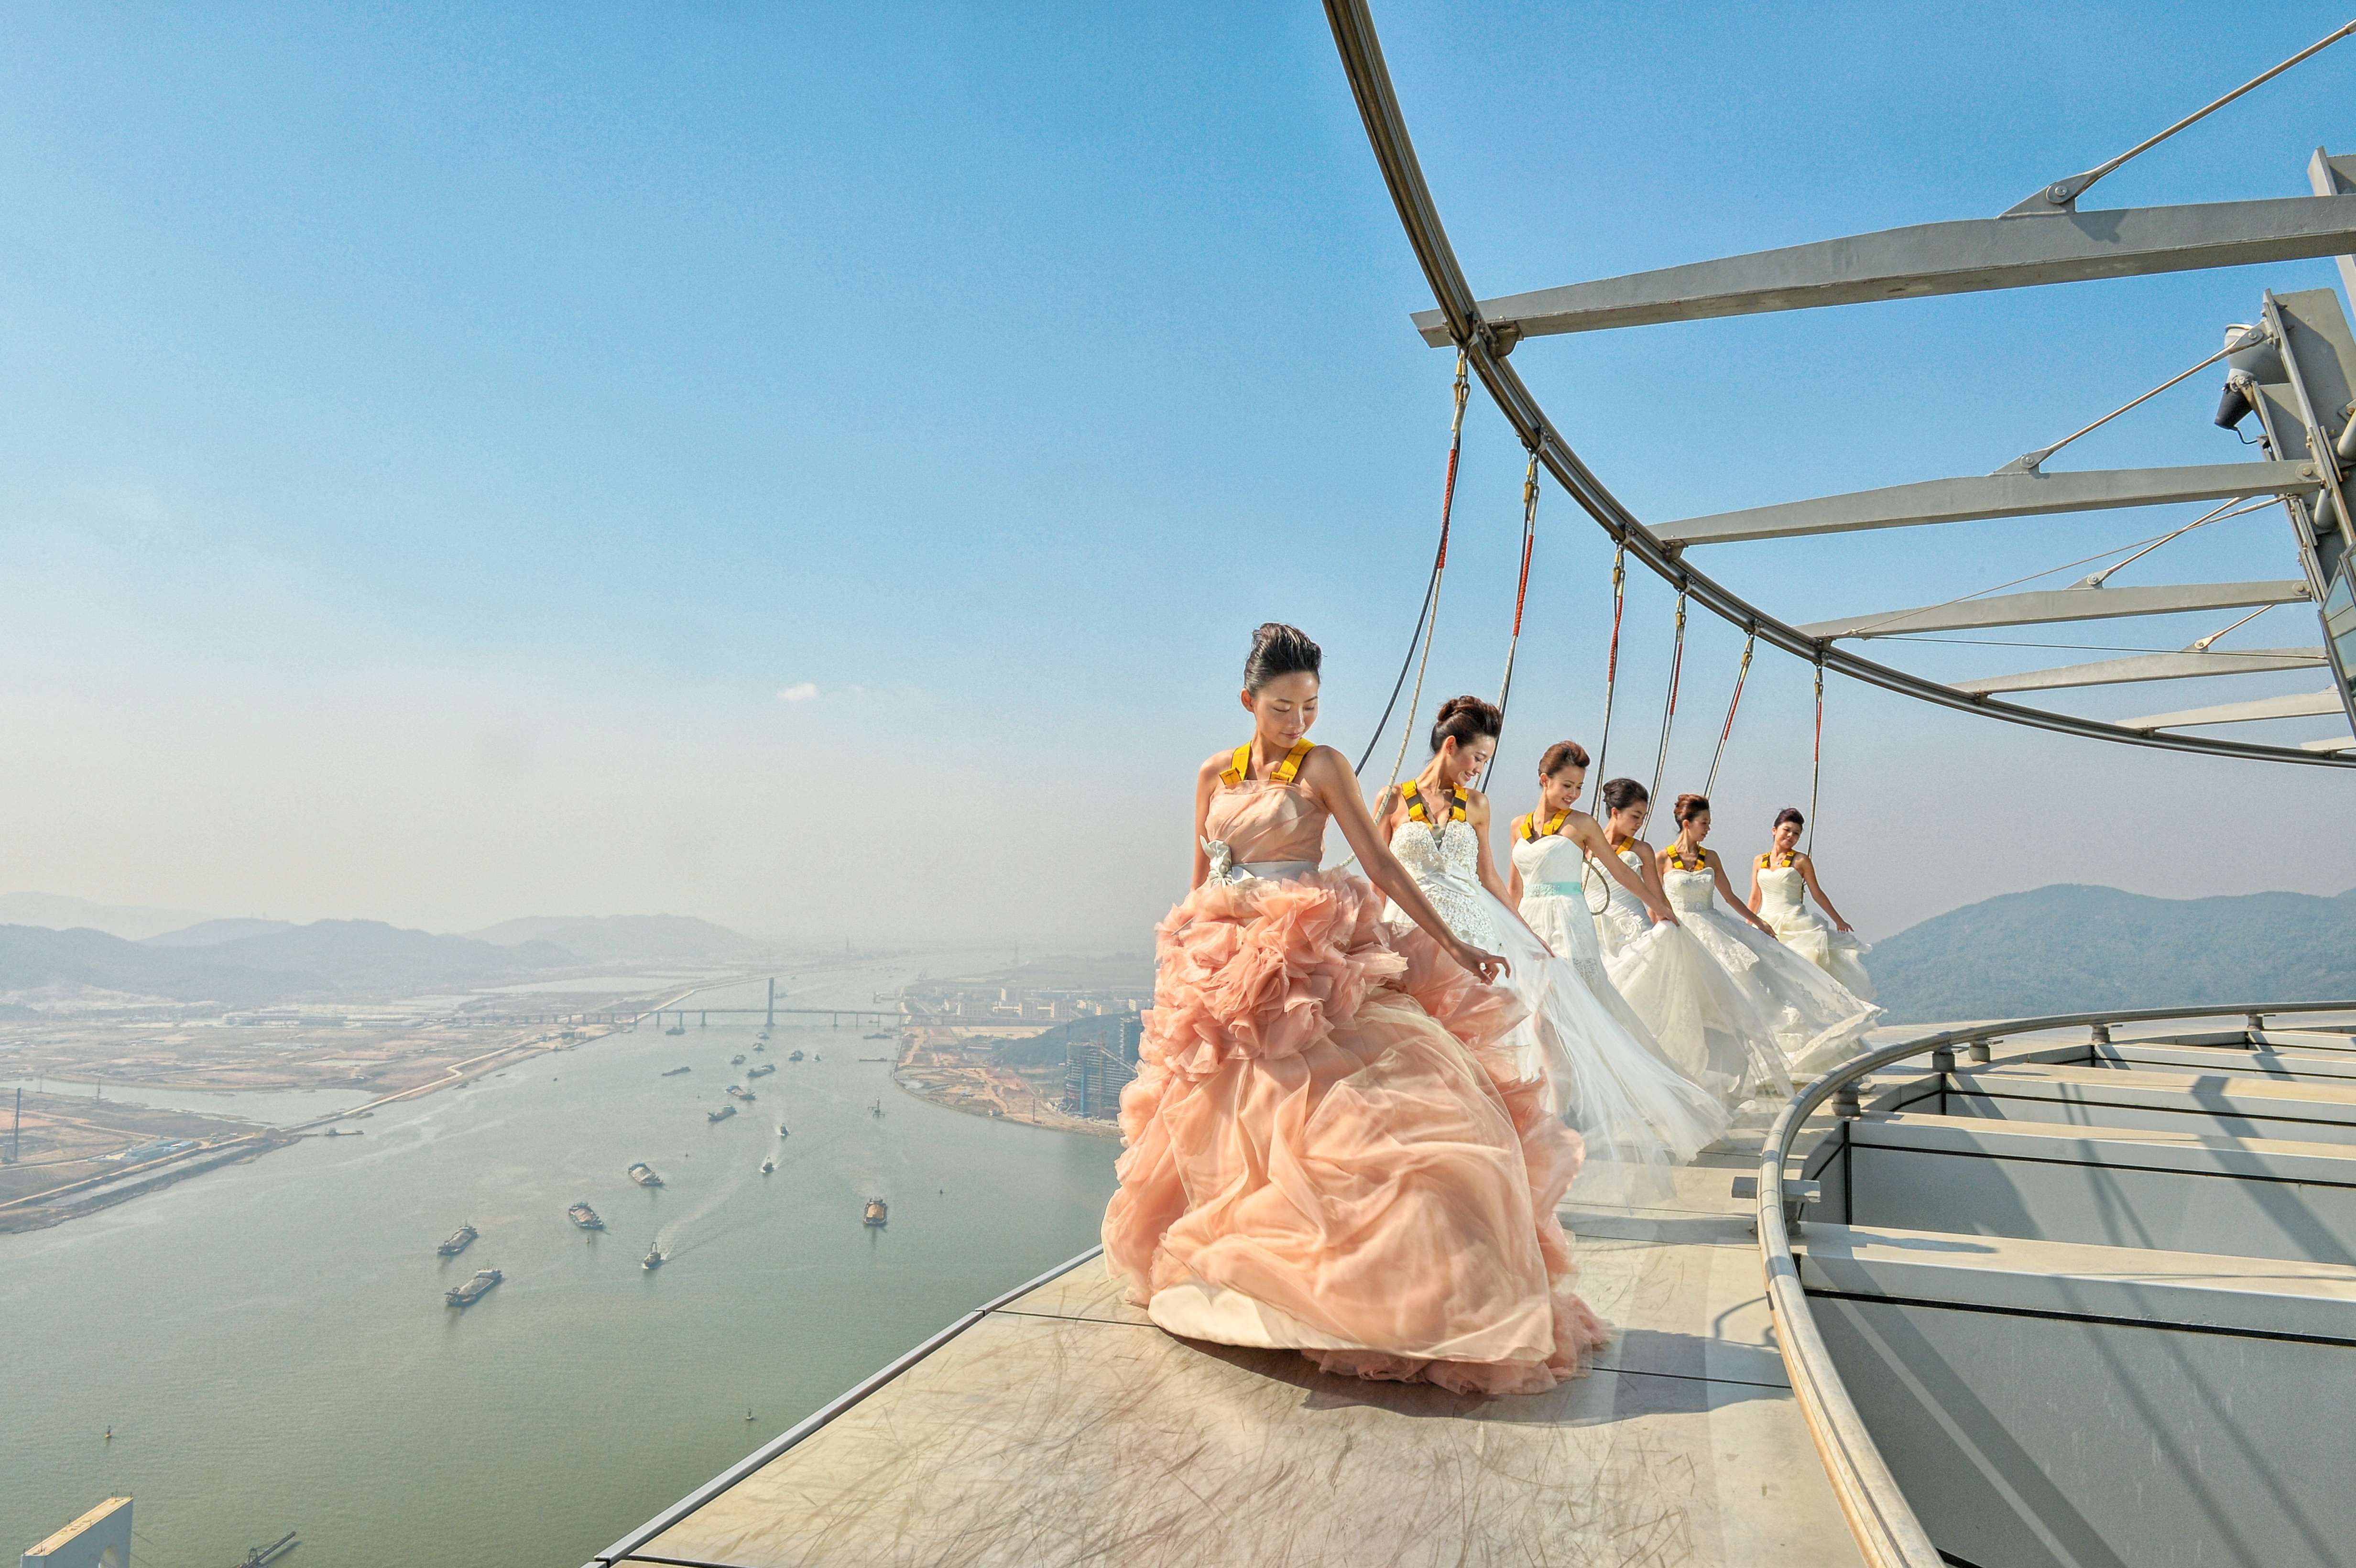 The Skywalk at Macau Tower offers a stunning backdrop for weddings.